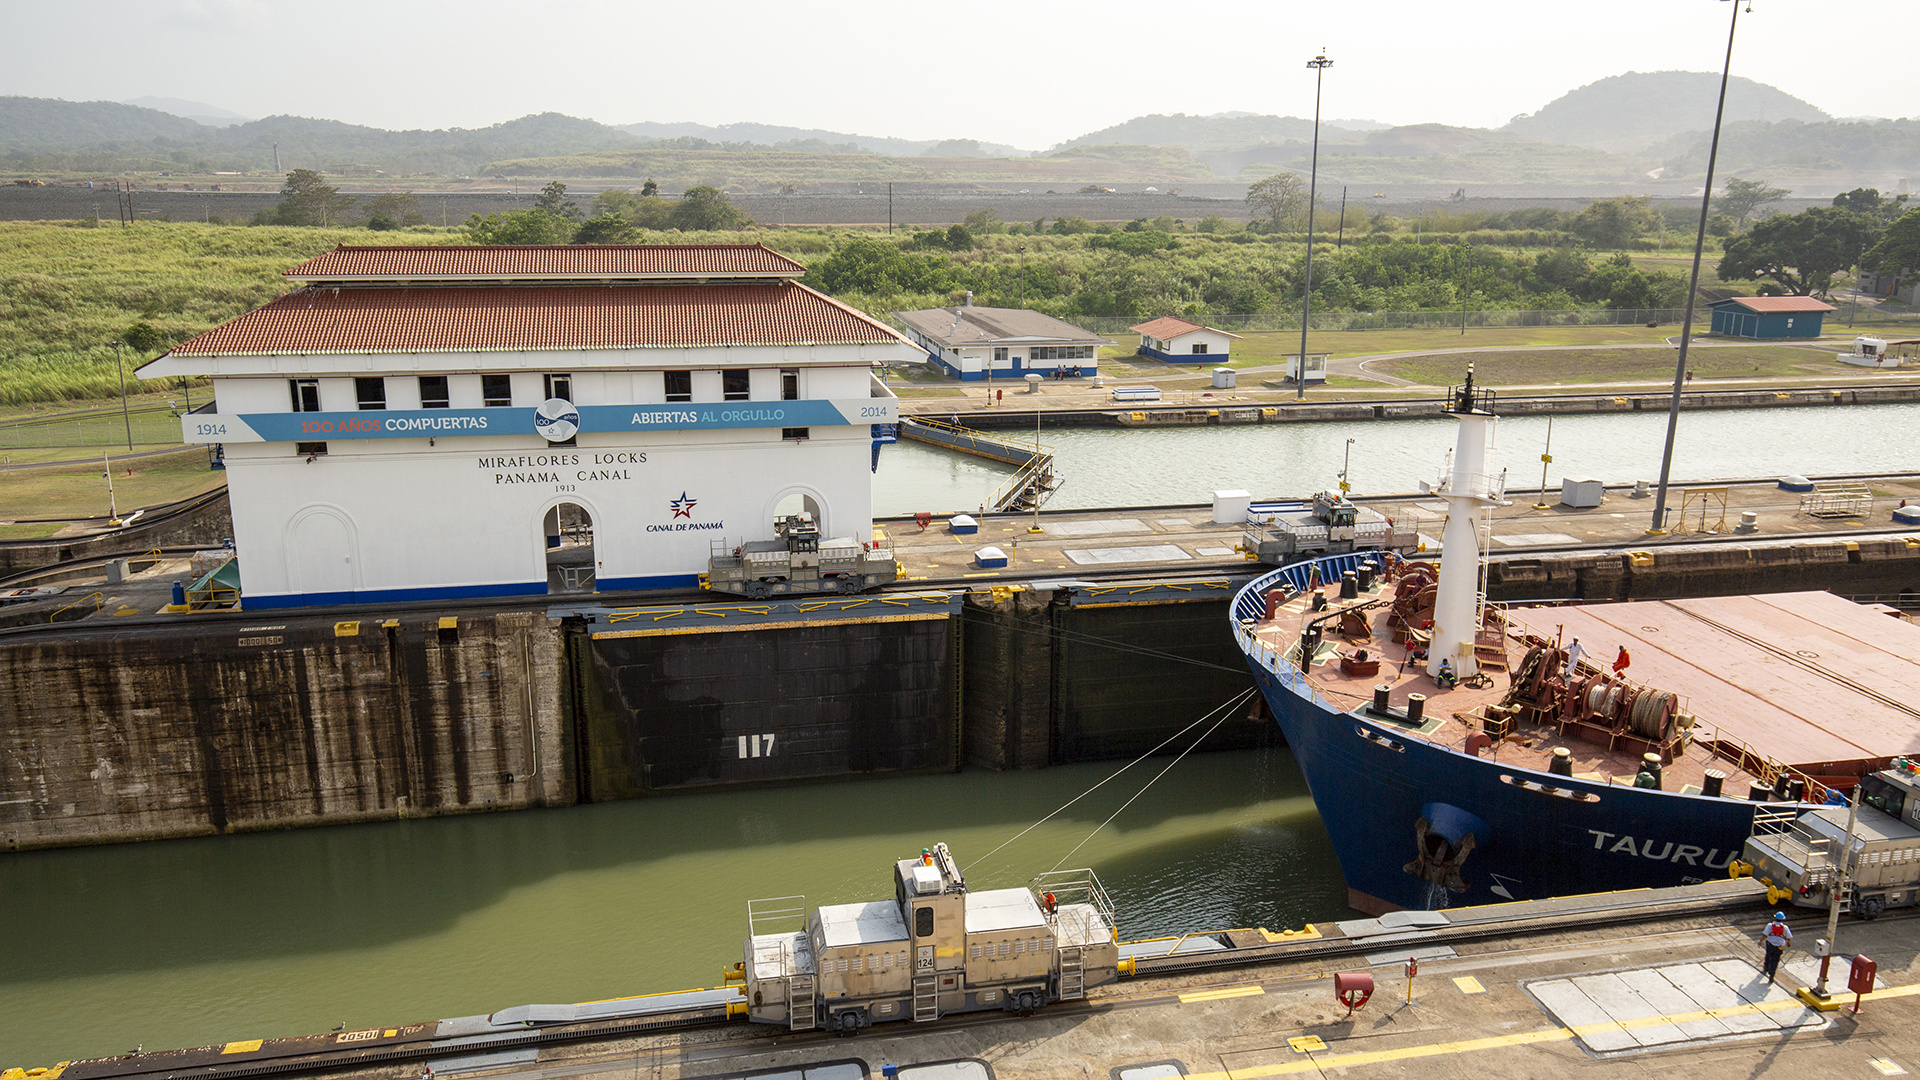 Miraflores locks, Iconic structure, Canal crossing experience, Engineering marvel, 1920x1080 Full HD Desktop